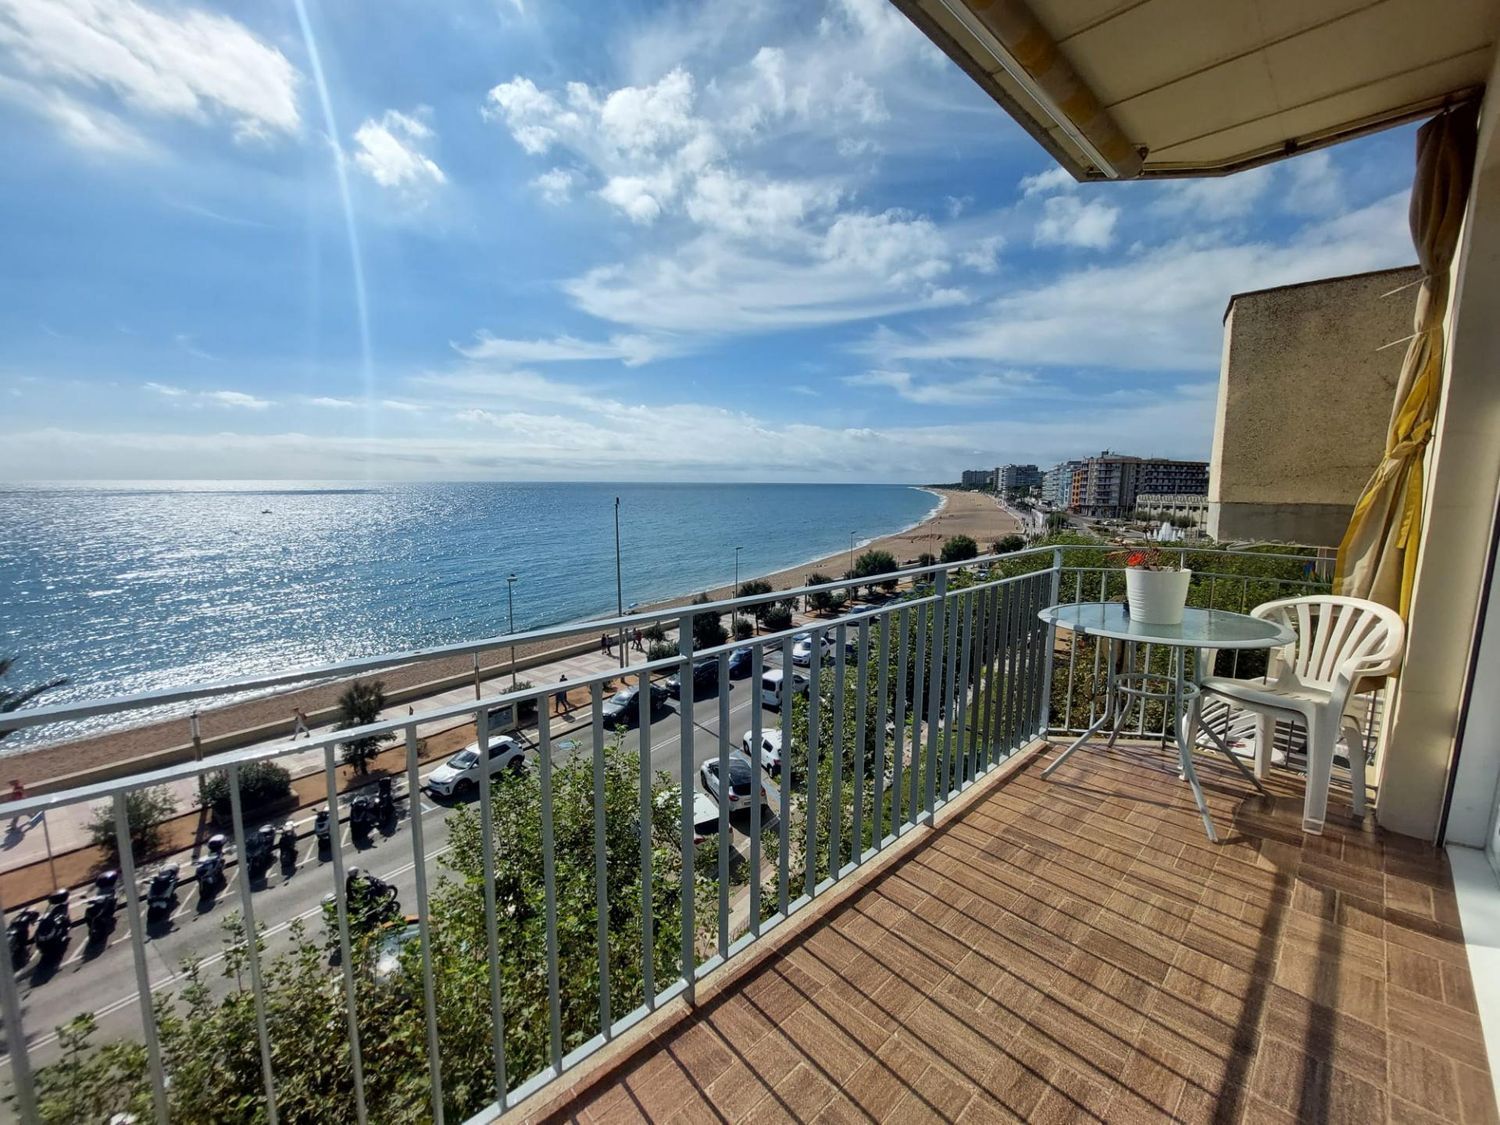 Apartment for sale on the seafront in Blanes